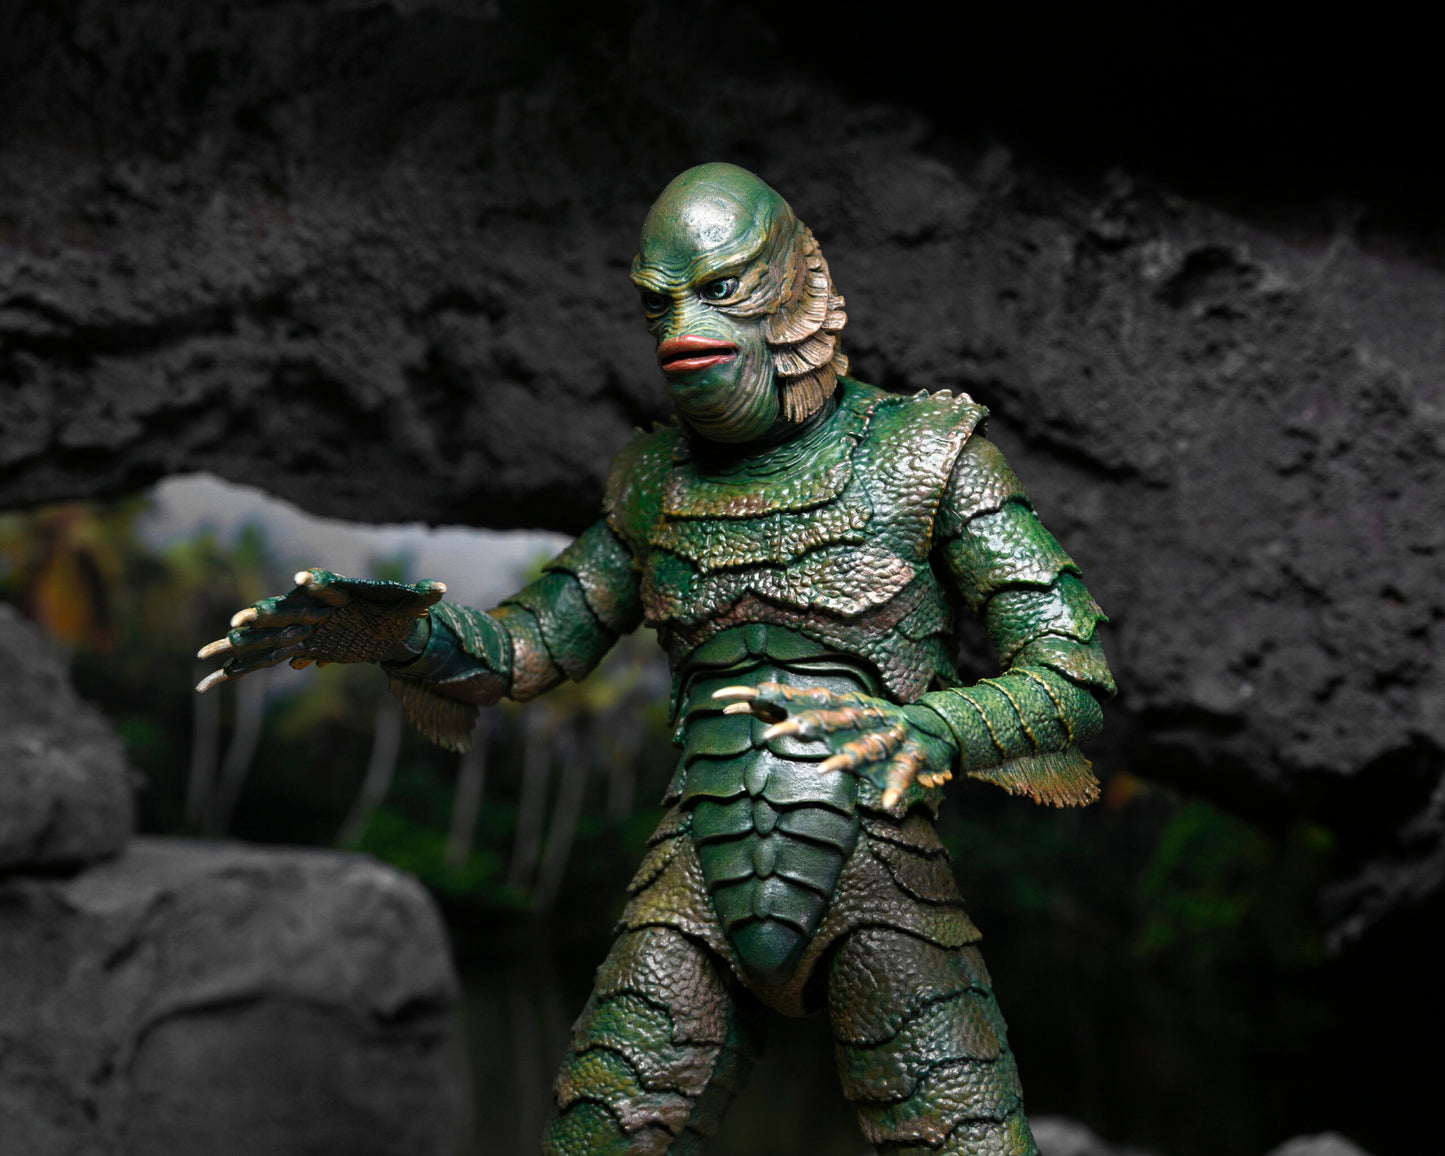 N.E.C.A - Universal Monsters  7” Scale Action Figure – Ultimate Creature from the Black Lagoon (Color)